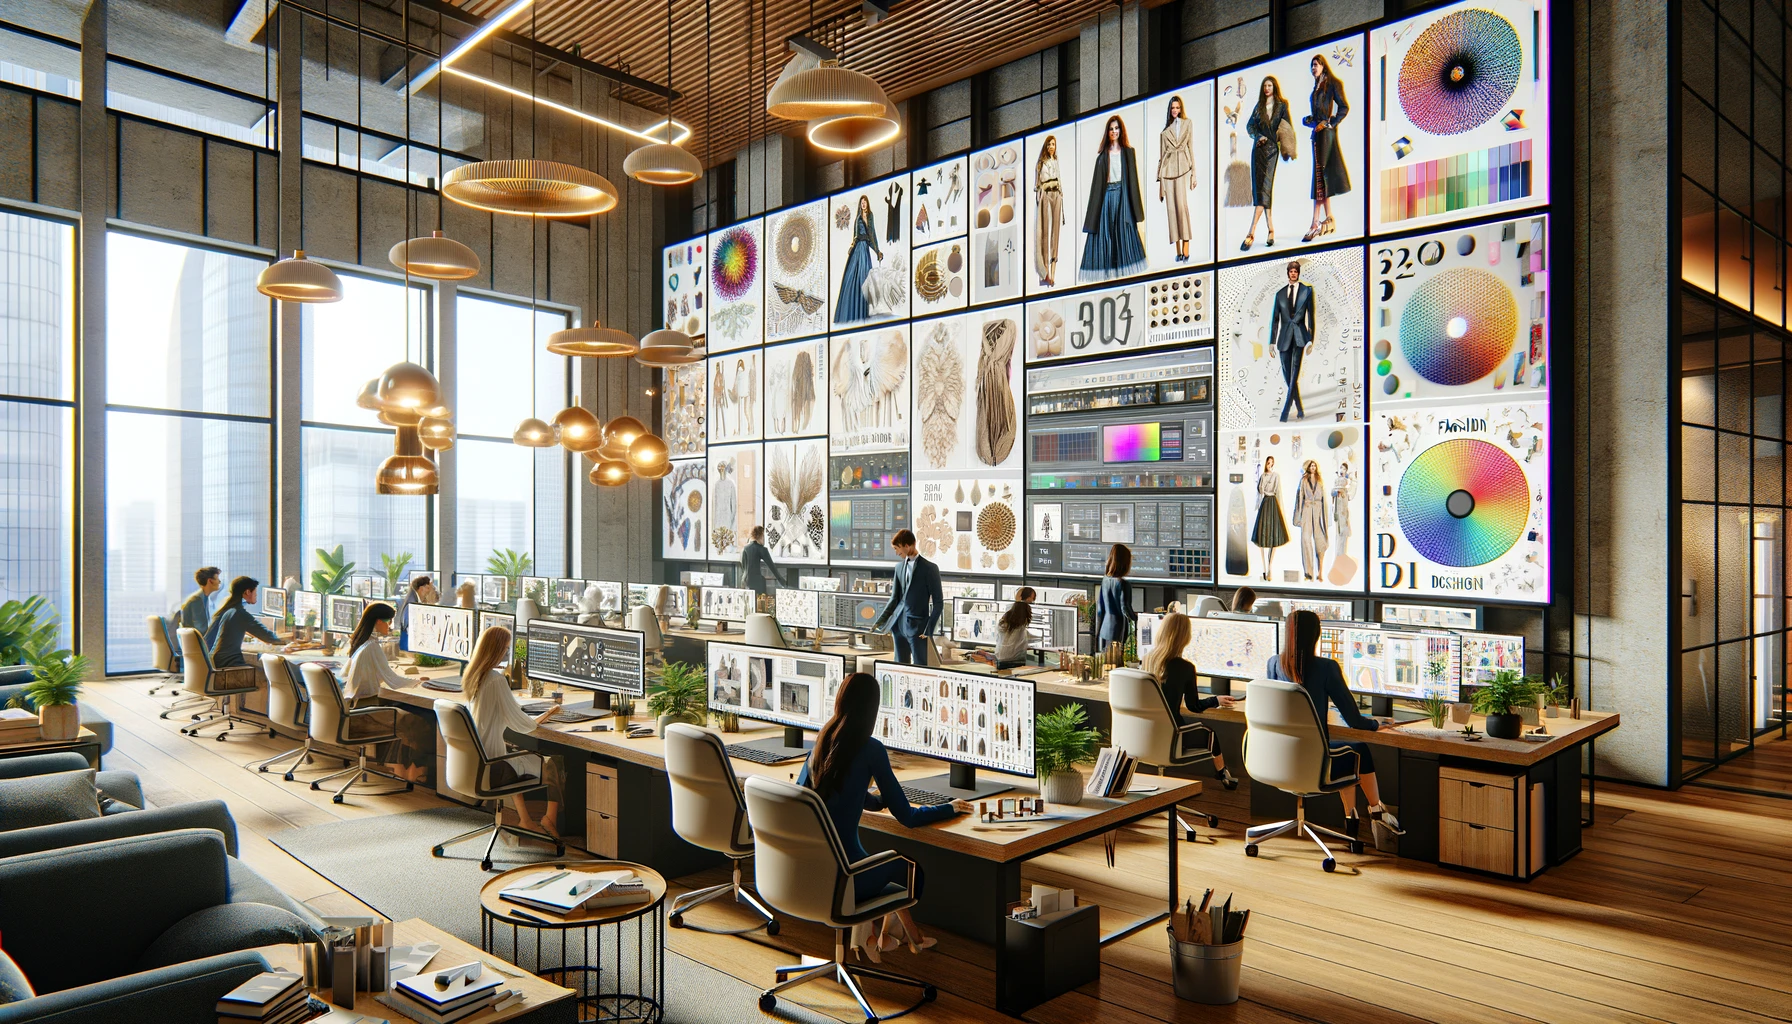 Revise the photorealistic 3D image to depict an office of a fashion and design company